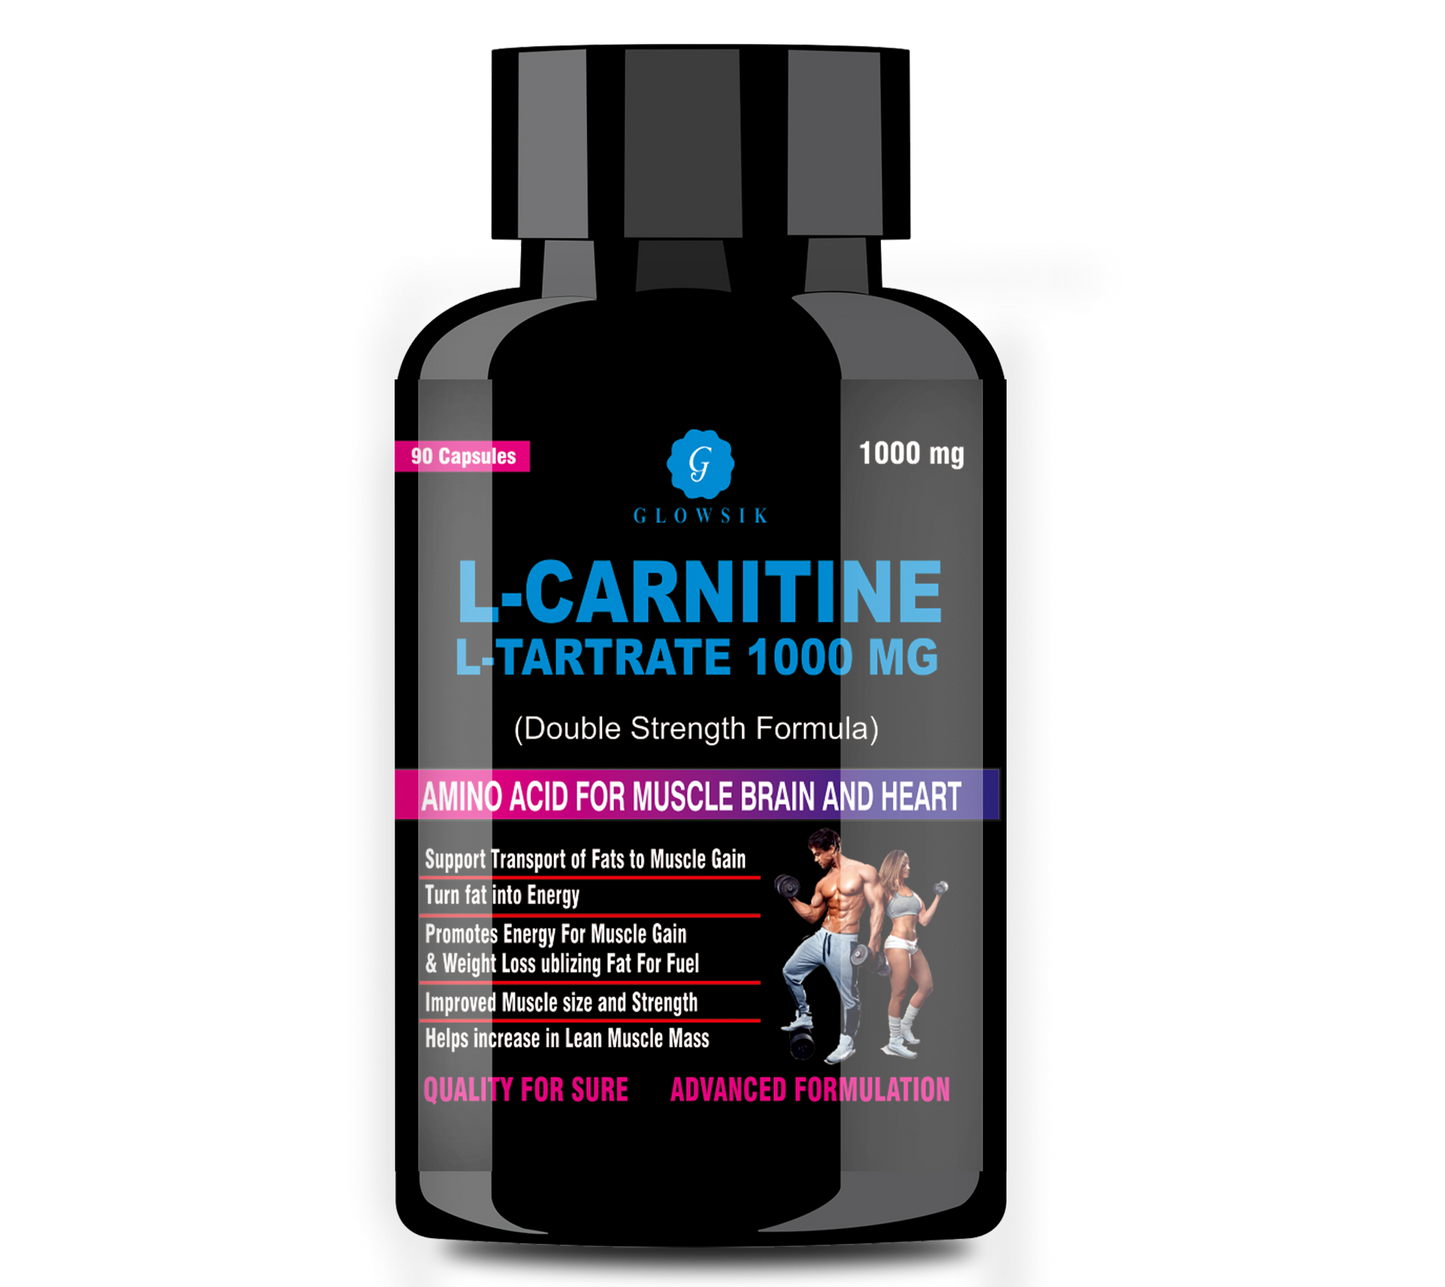 G GLOWSIK L-Carnitine L- Tartrate for weight loss pre work out supplements - 90 capsules  (1000 mg)